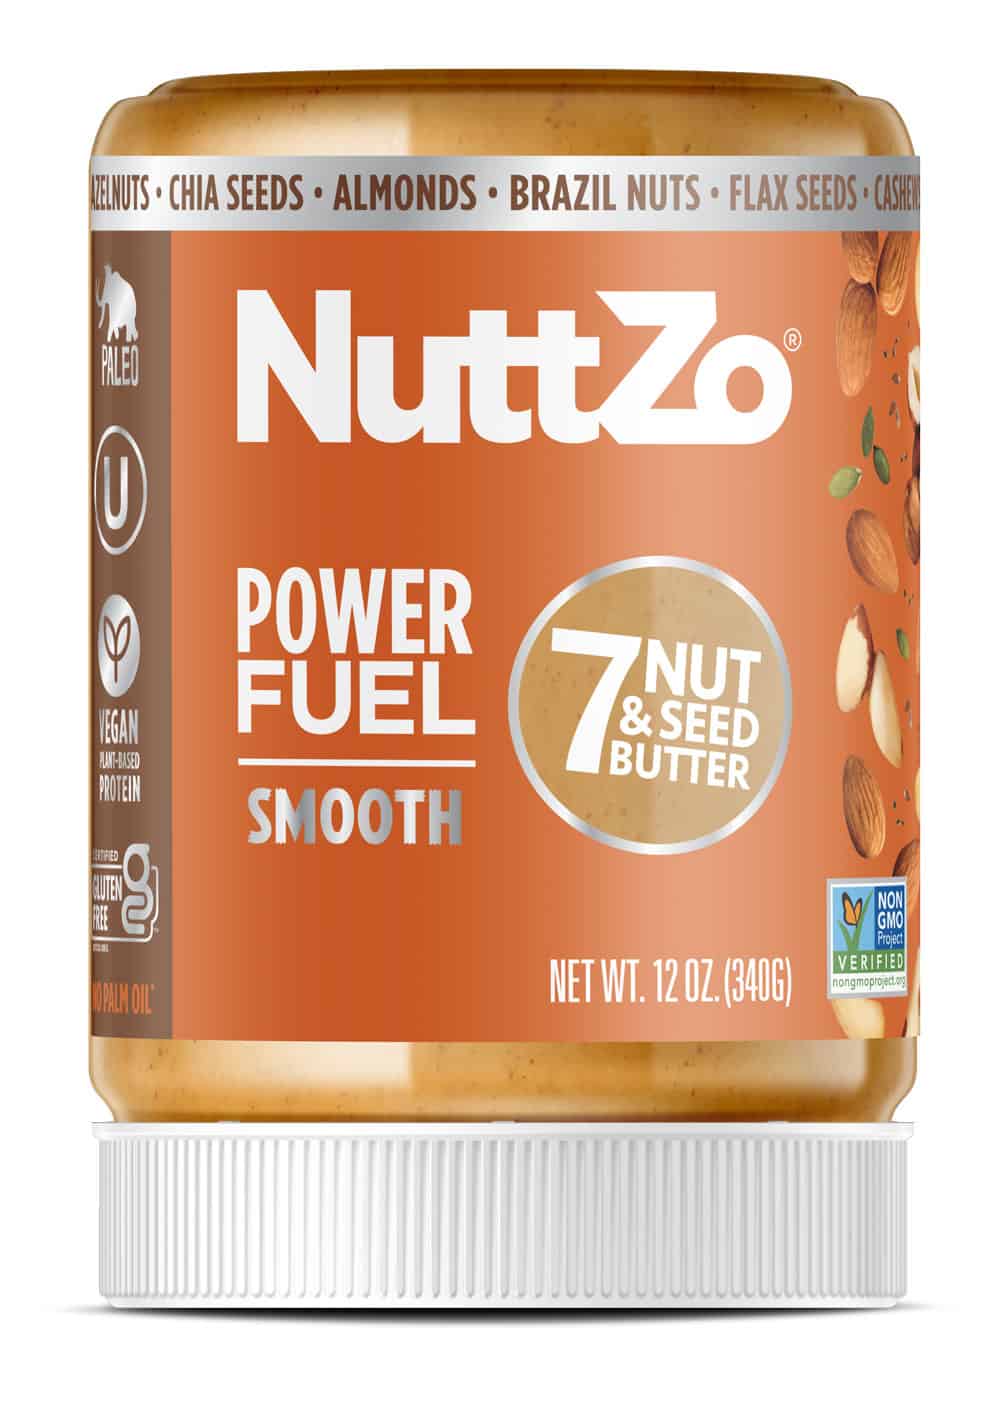 Nuttzo Power Fuel, Mixed Nut & Seed Butter -Smooth  6 units per case 12.0 oz